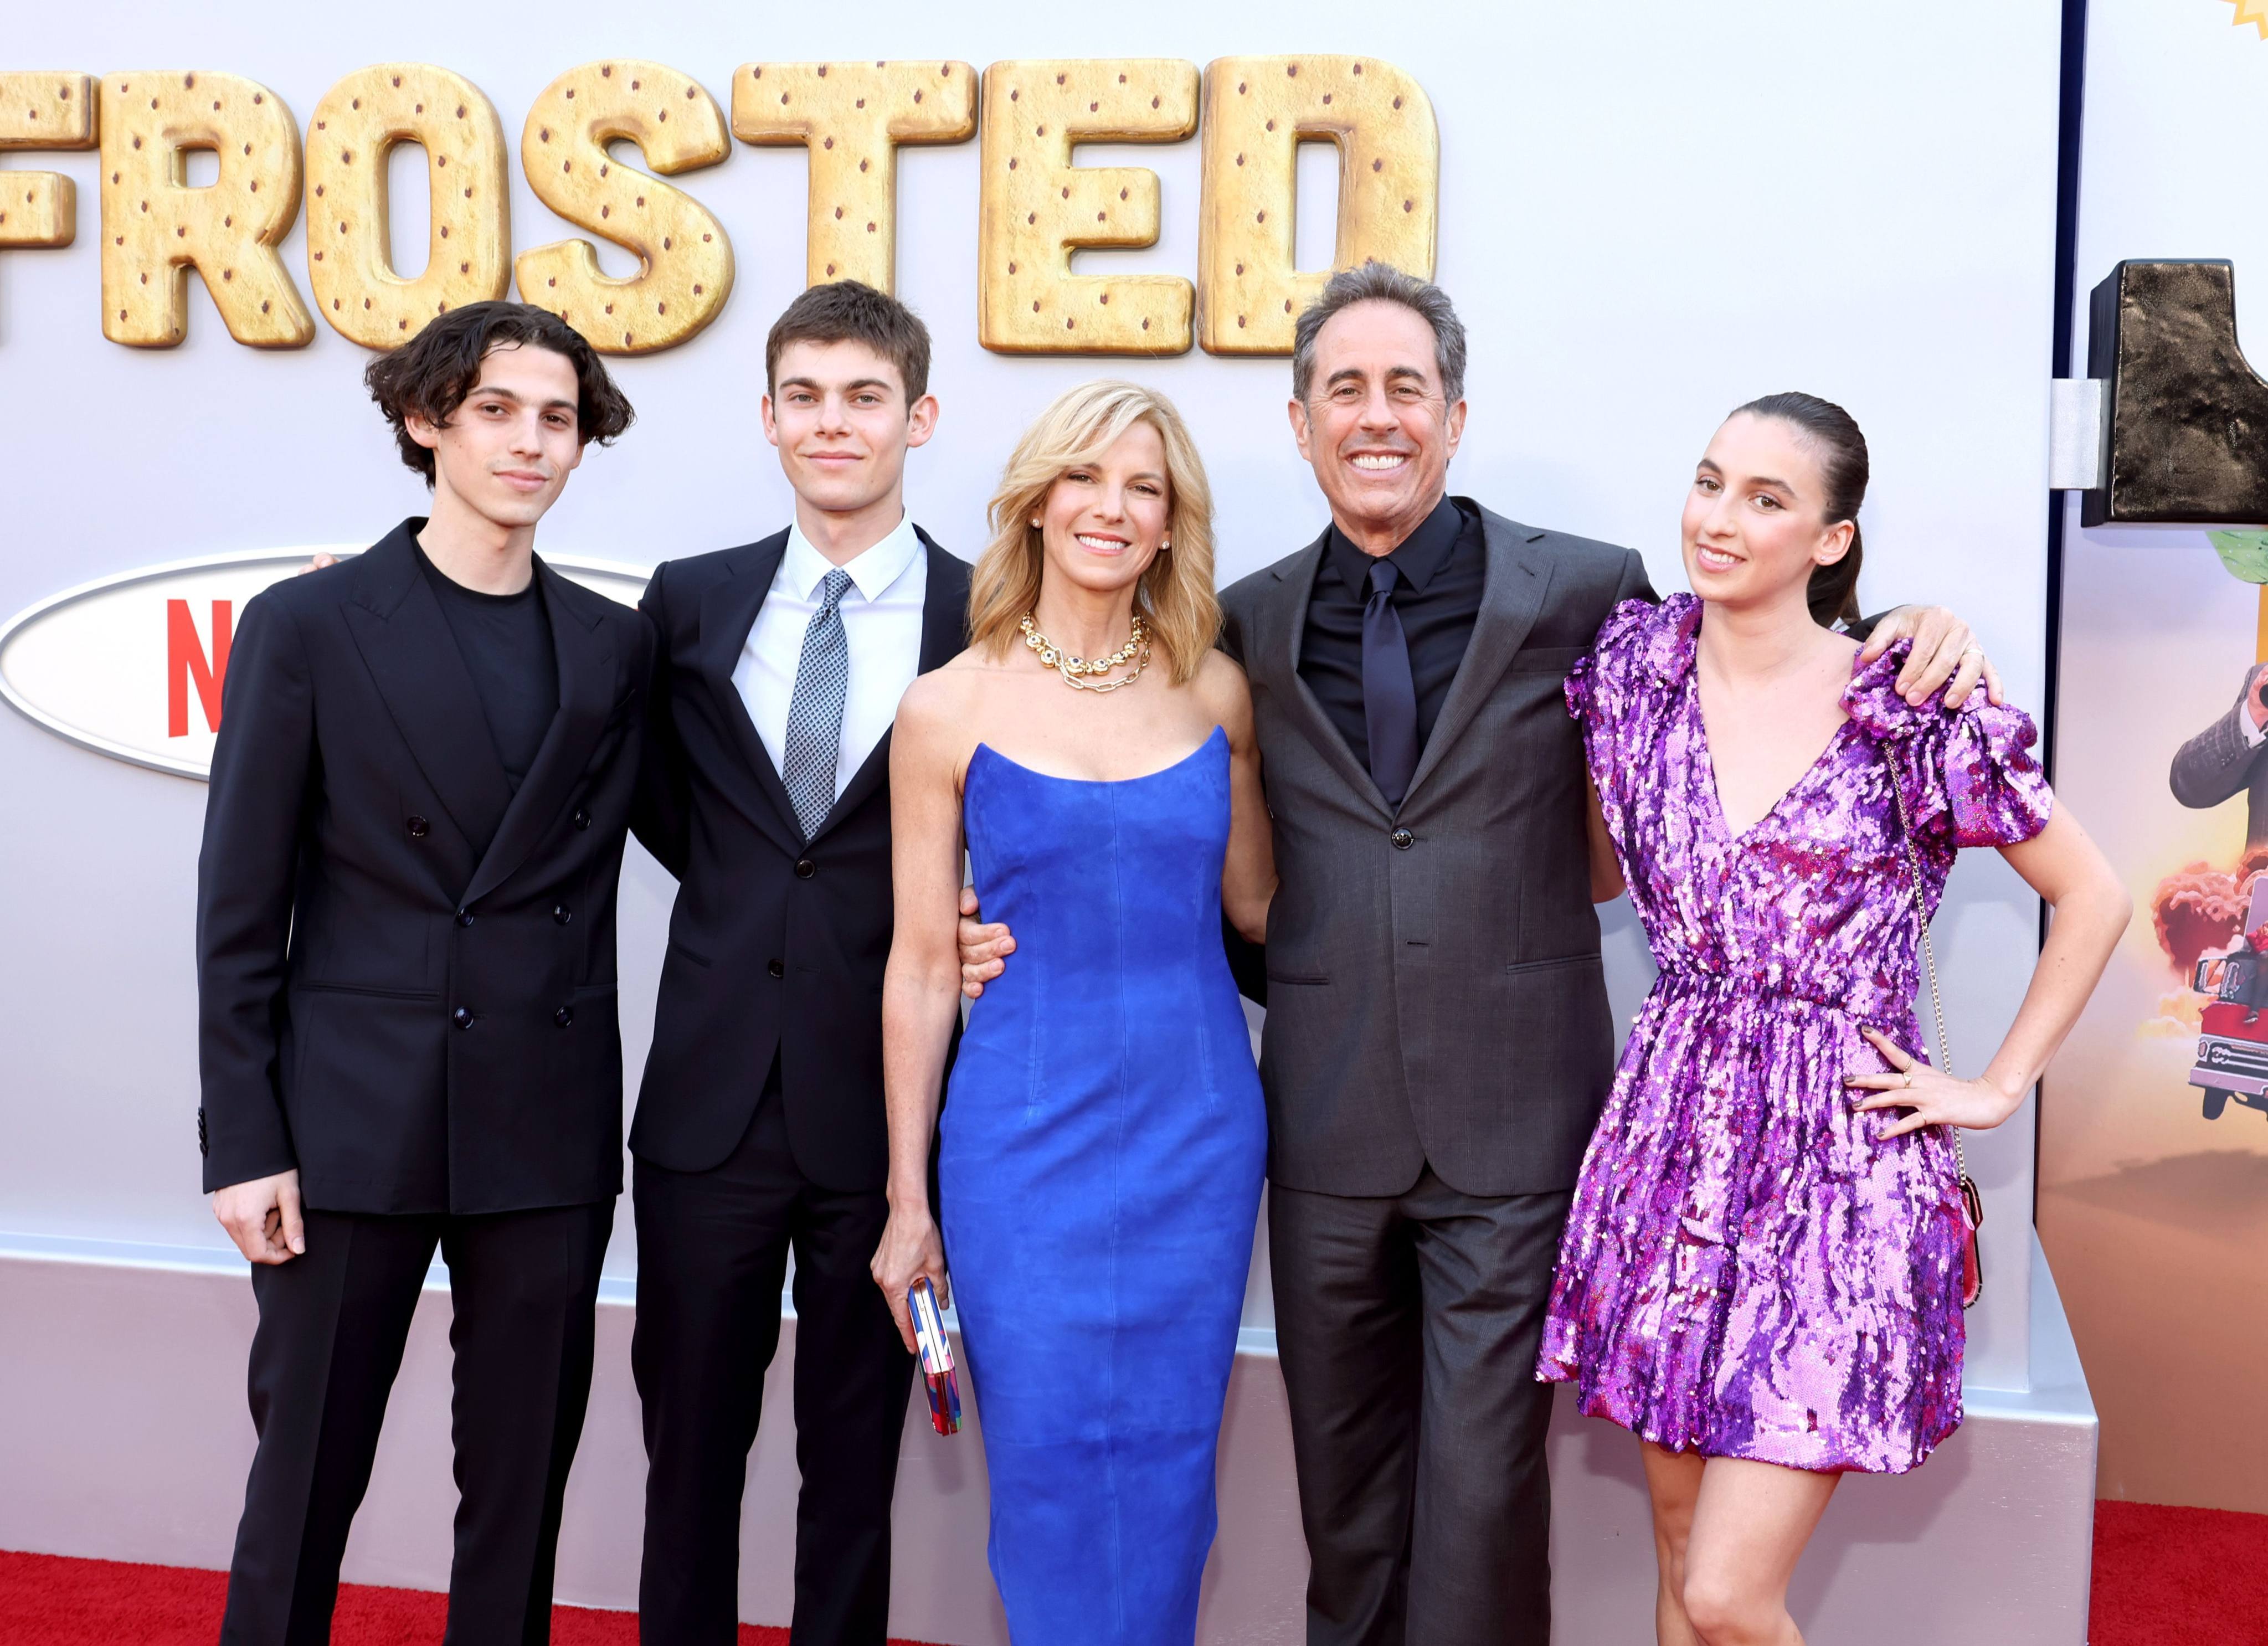 Jerry Seinfeld’s family just made a rare appearance to celebrate his directorial debut. Photo: Getty Images